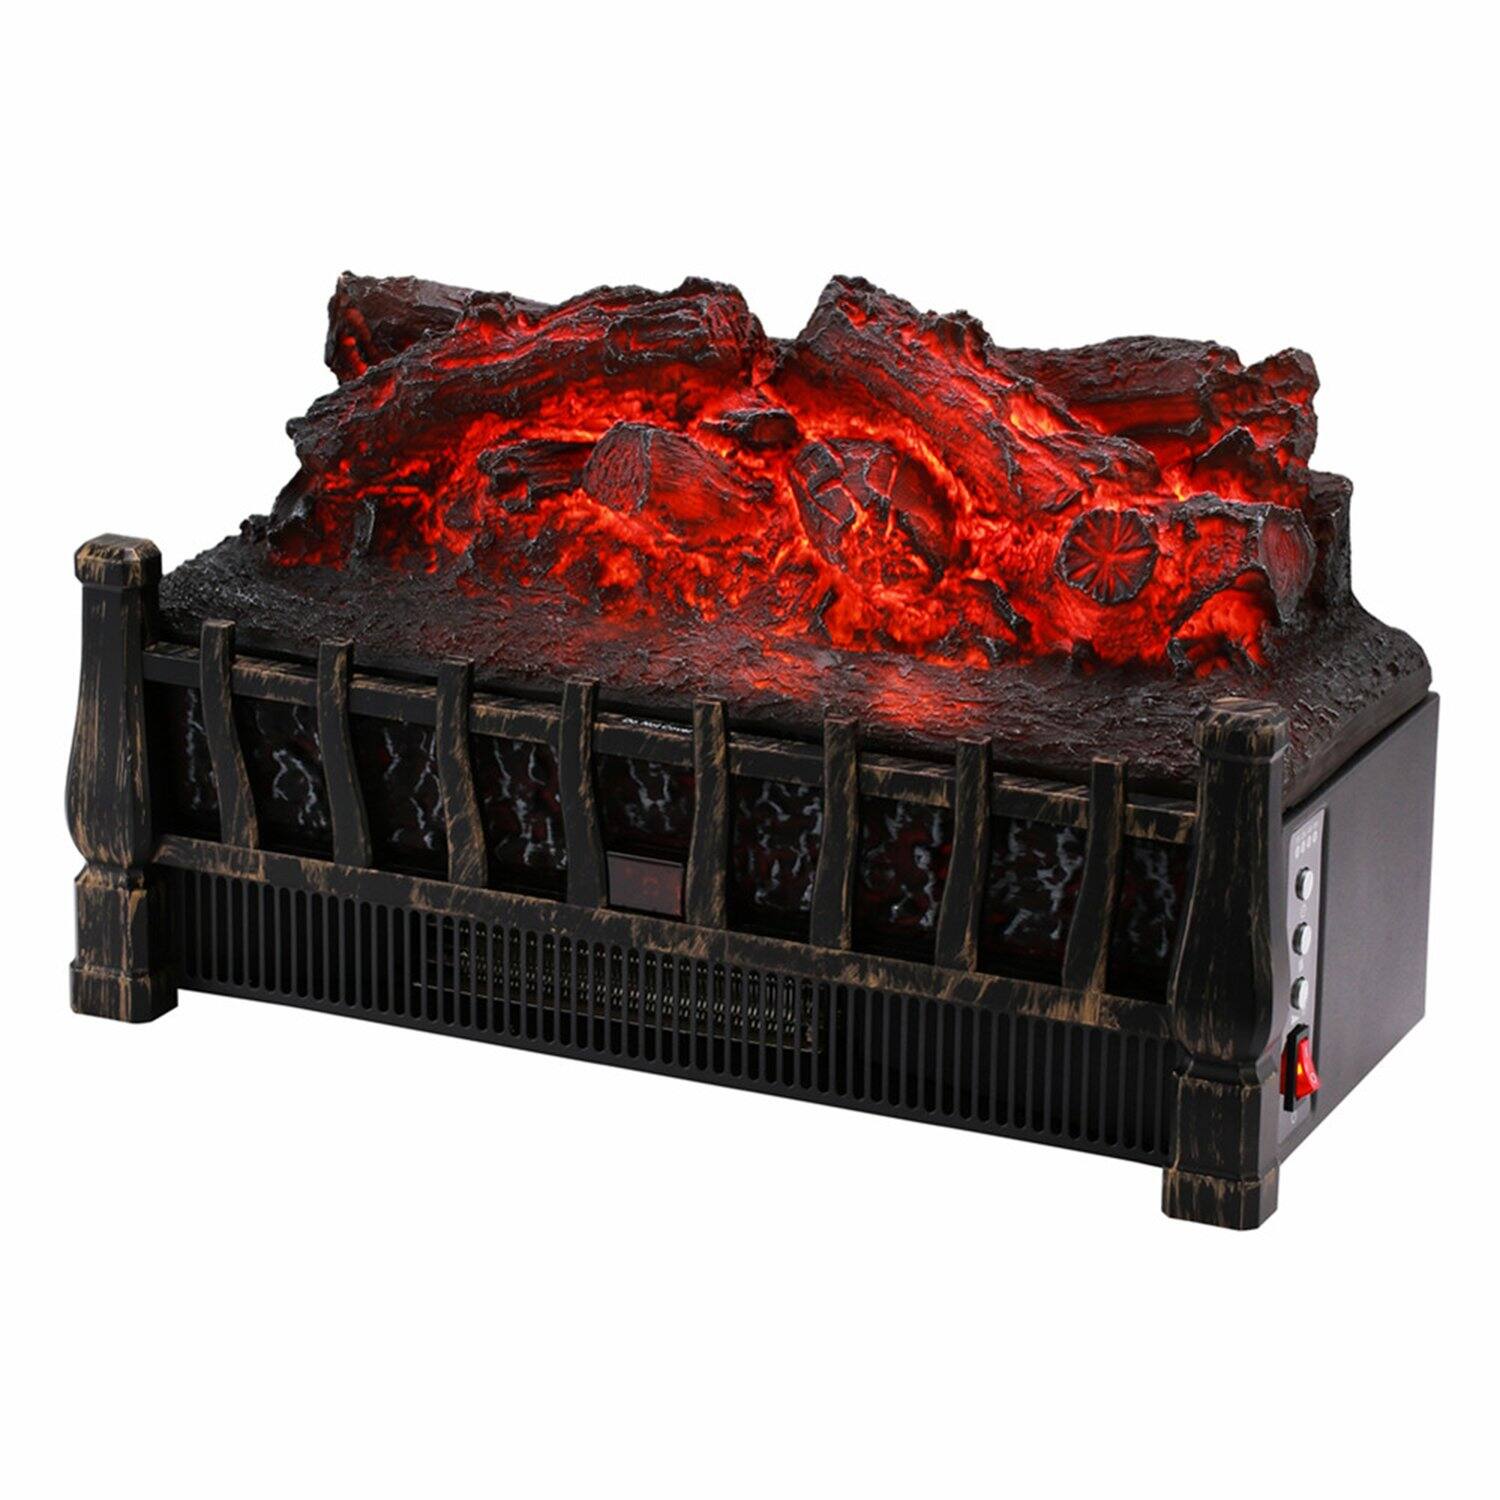 Ainfox 1500W 120V Electric Fireplace Artificial Crude Wood for $102.00 + Free Shipping